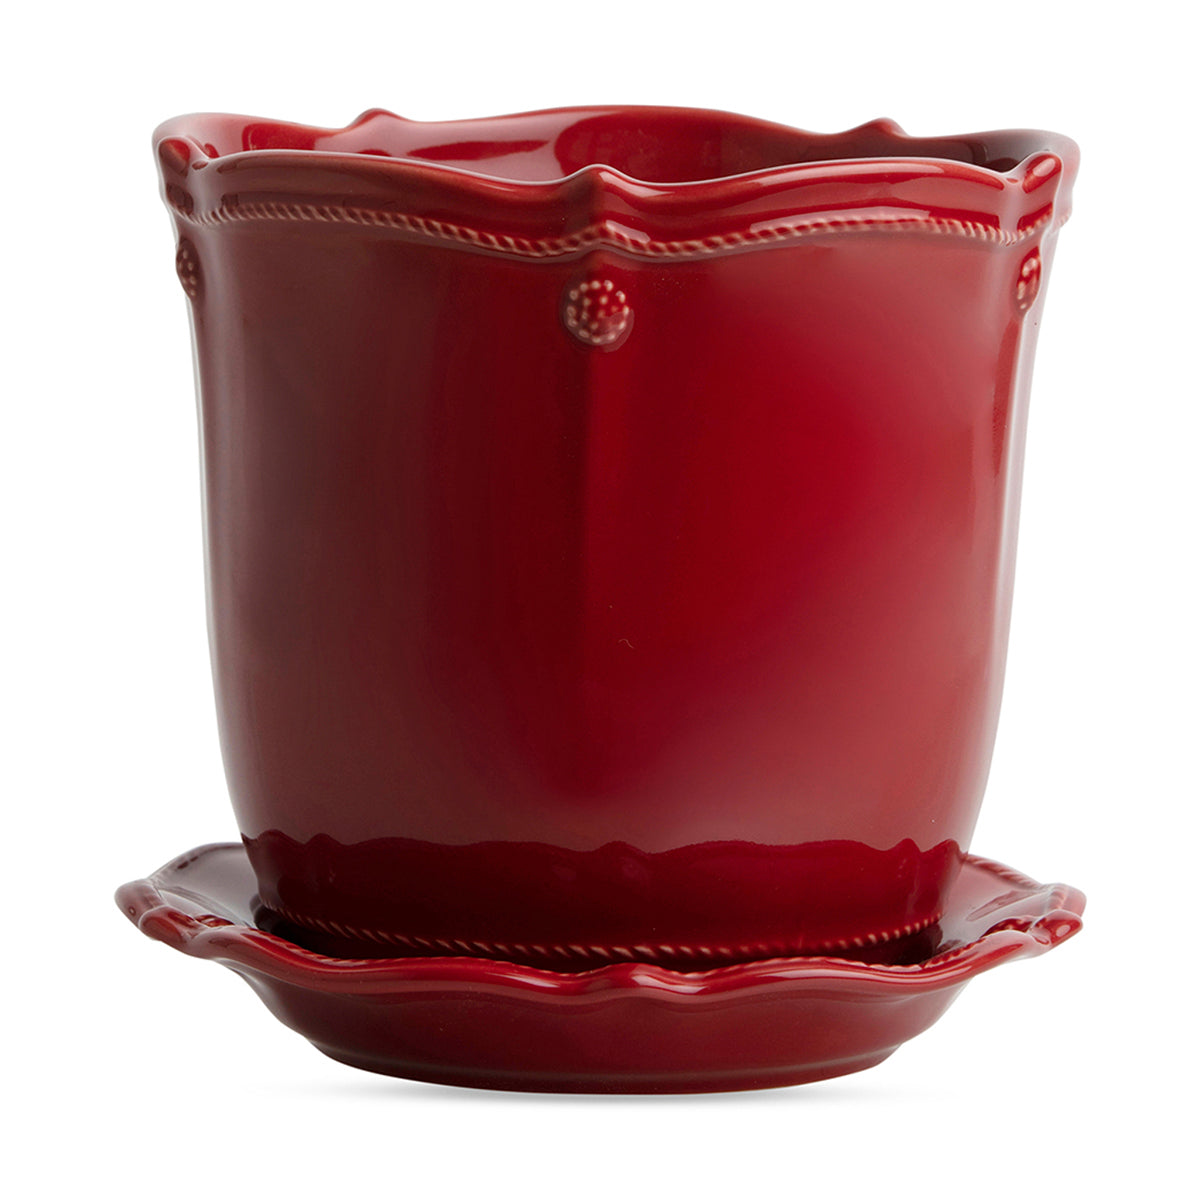 Beautifully display your plants in a festive red Berry &amp; Thread ceramic planter. Designed with function in mind, each has a small hole at the bottom for drainage and comes with a corresponding saucer. This 7-inch size hosts medium plants such as Holiday poinsettias and orchids or ferns and greenery and looks darling when clustered in a grouping.